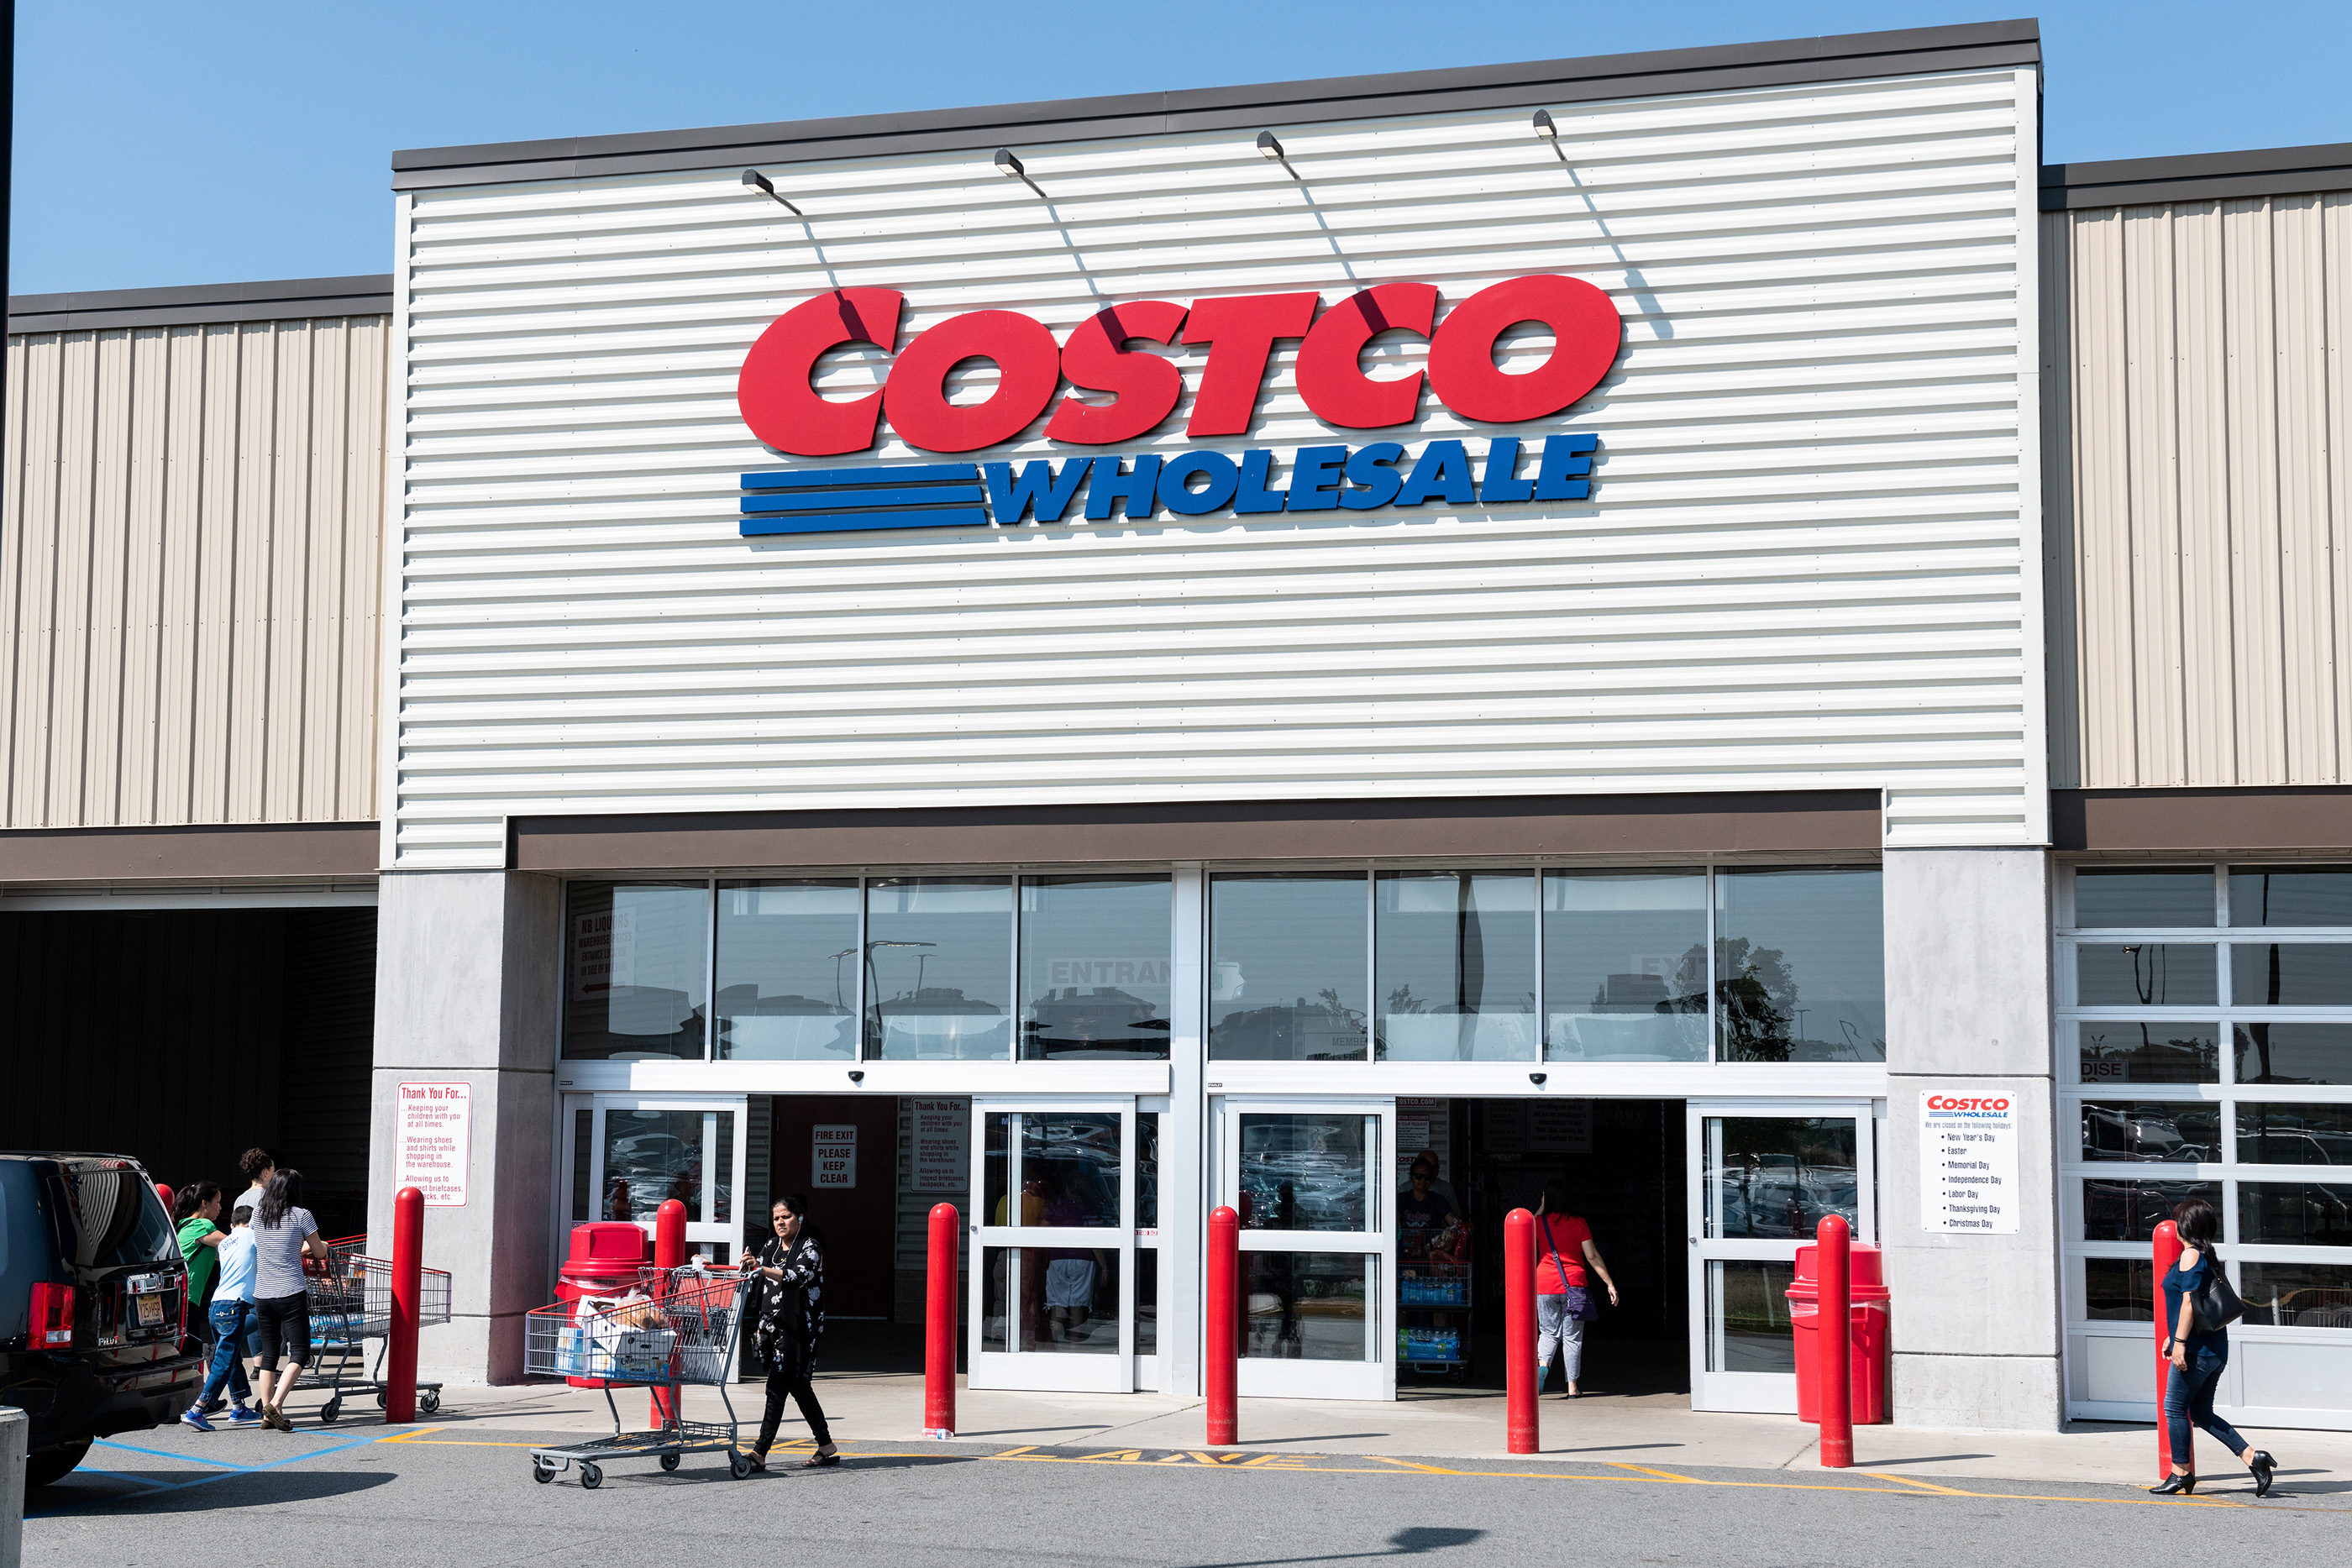 6 Things You Should NEVER Buy at Costco, According to Superfans